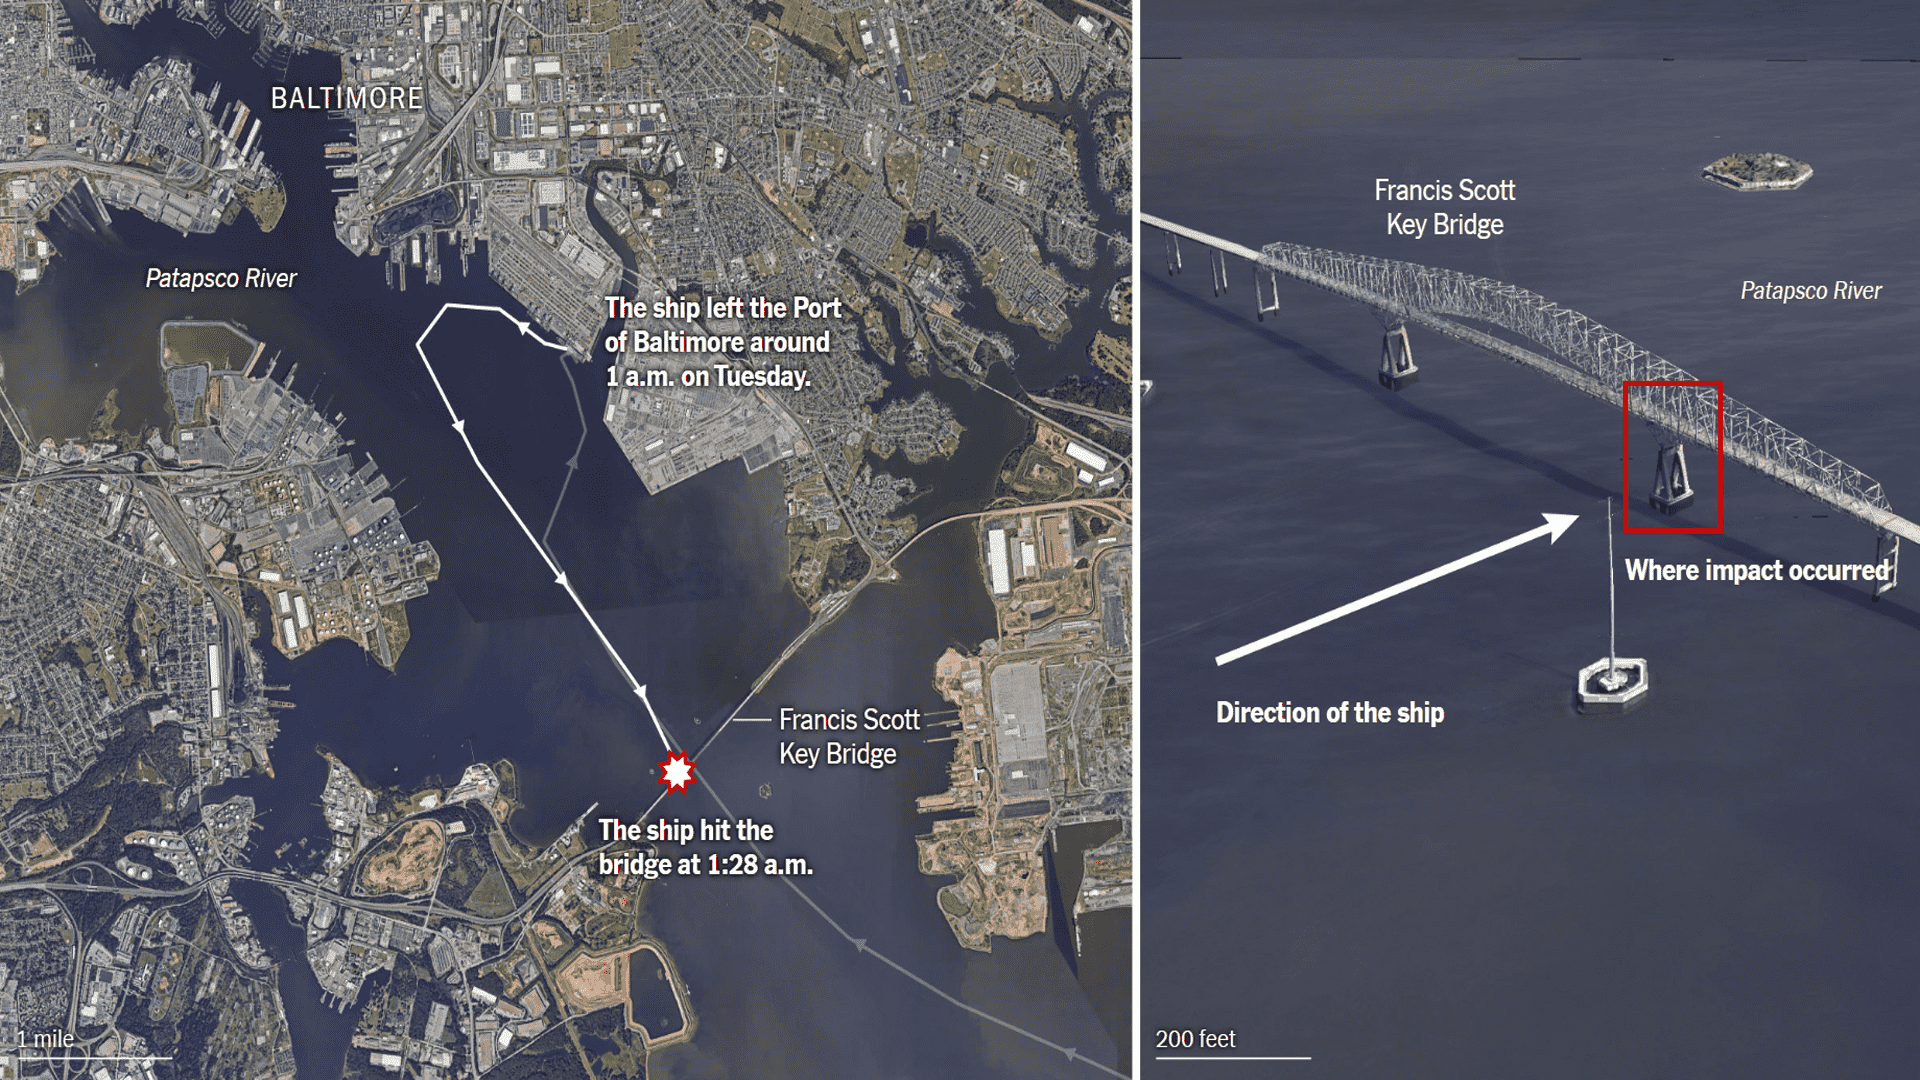 How The Baltimore's Francis Scott Key Bridge Collapsed After A 948-Foot Container Ship Crashed Into It (Credits The New York Times)